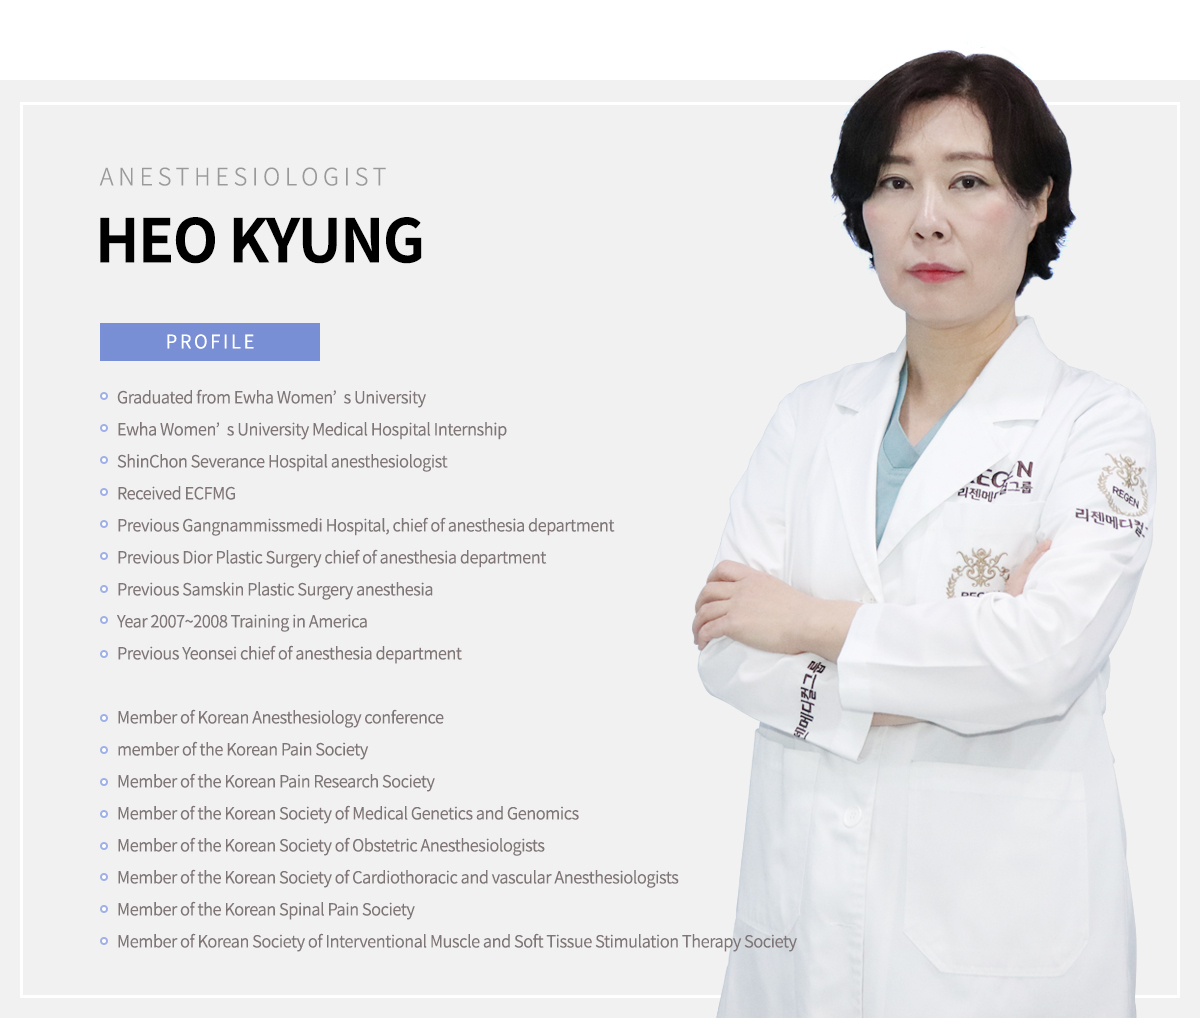 ANESTHESIOGIST HEO KYUNG